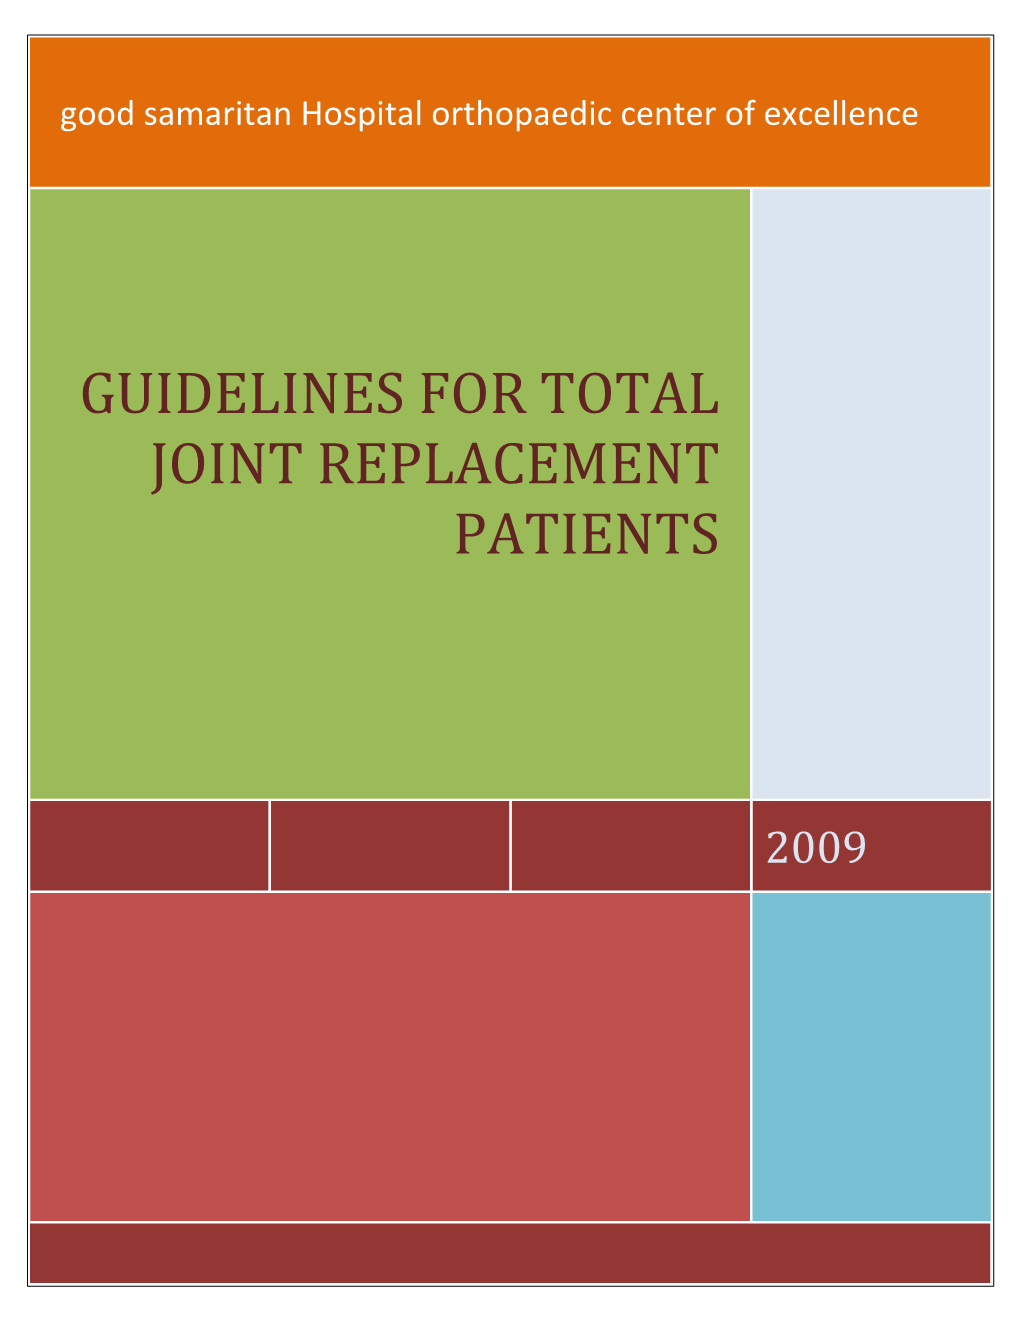 Guidelines for Total Joint Replacement Patients